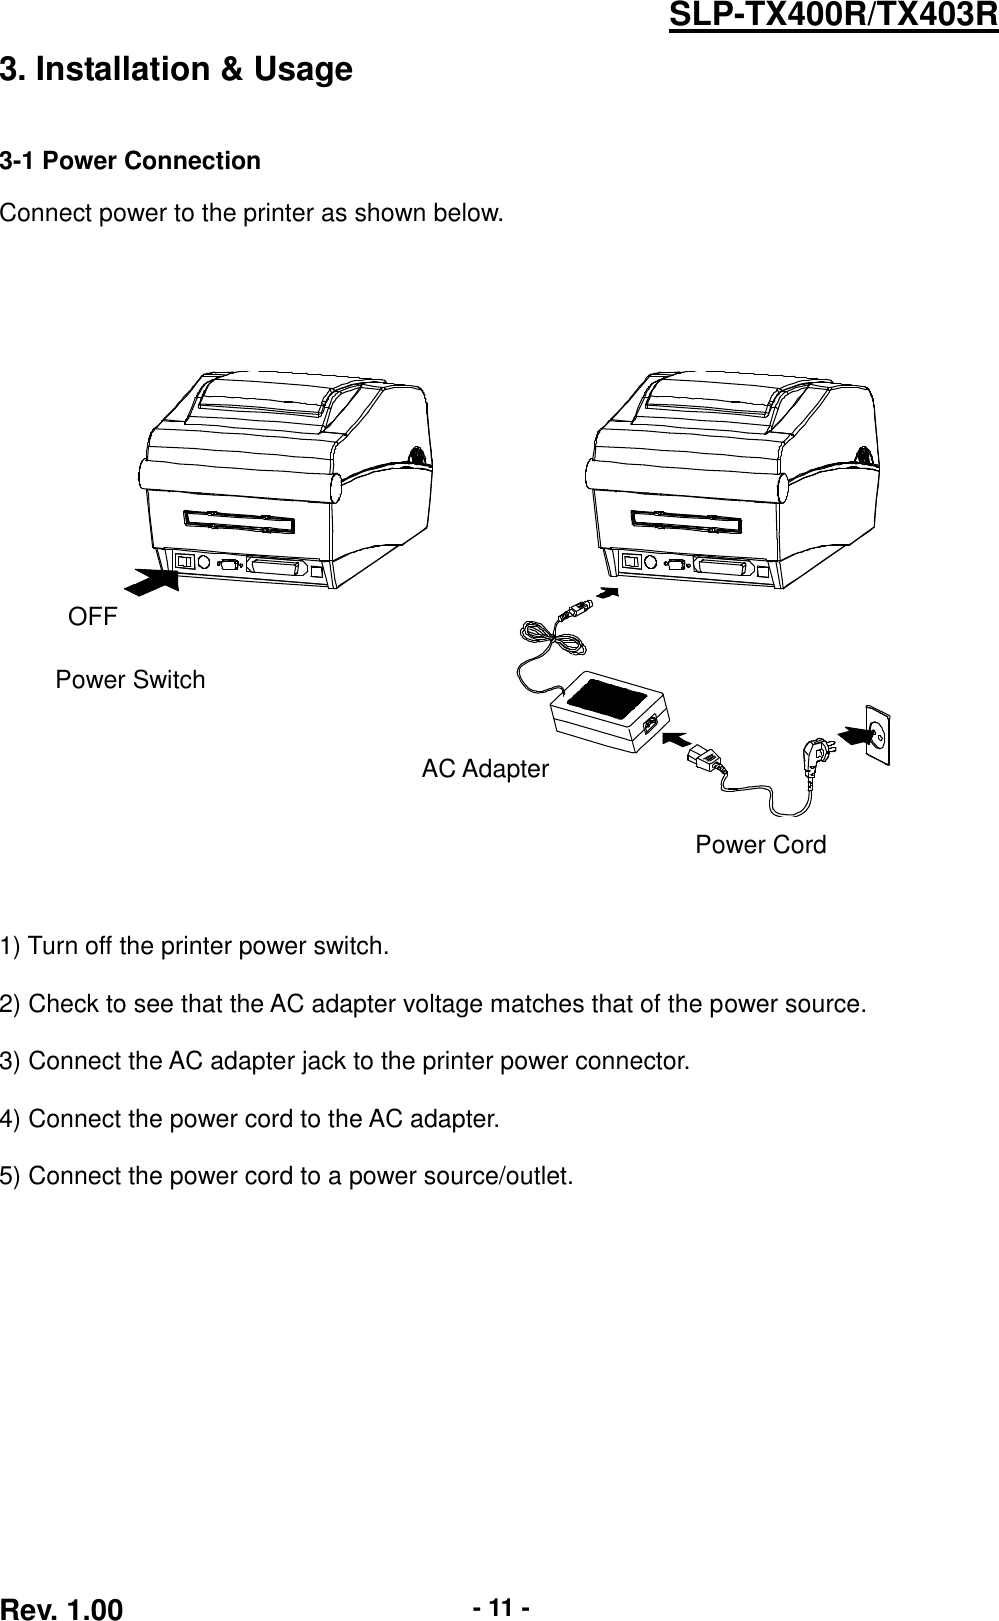  Rev. 1.00 - 11 - SLP-TX400R/TX403R 3. Installation &amp; Usage   3-1 Power Connection  Connect power to the printer as shown below.             1) Turn off the printer power switch.  2) Check to see that the AC adapter voltage matches that of the power source.  3) Connect the AC adapter jack to the printer power connector.  4) Connect the power cord to the AC adapter.  5) Connect the power cord to a power source/outlet. OFF Power Switch Power Cord AC Adapter 